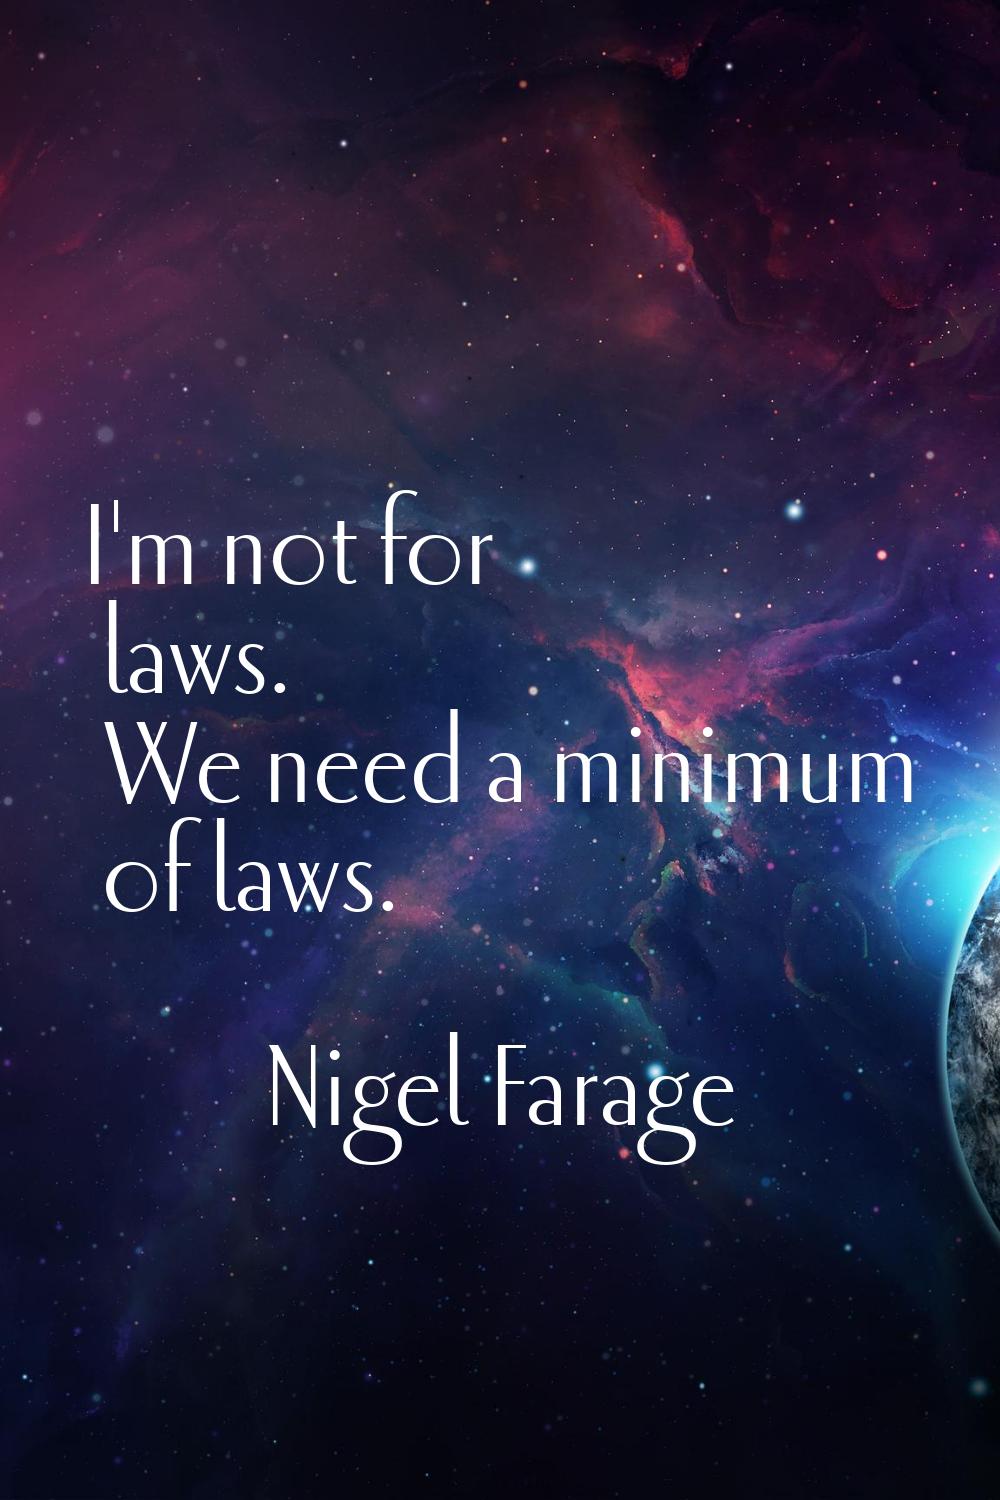 I'm not for laws. We need a minimum of laws.